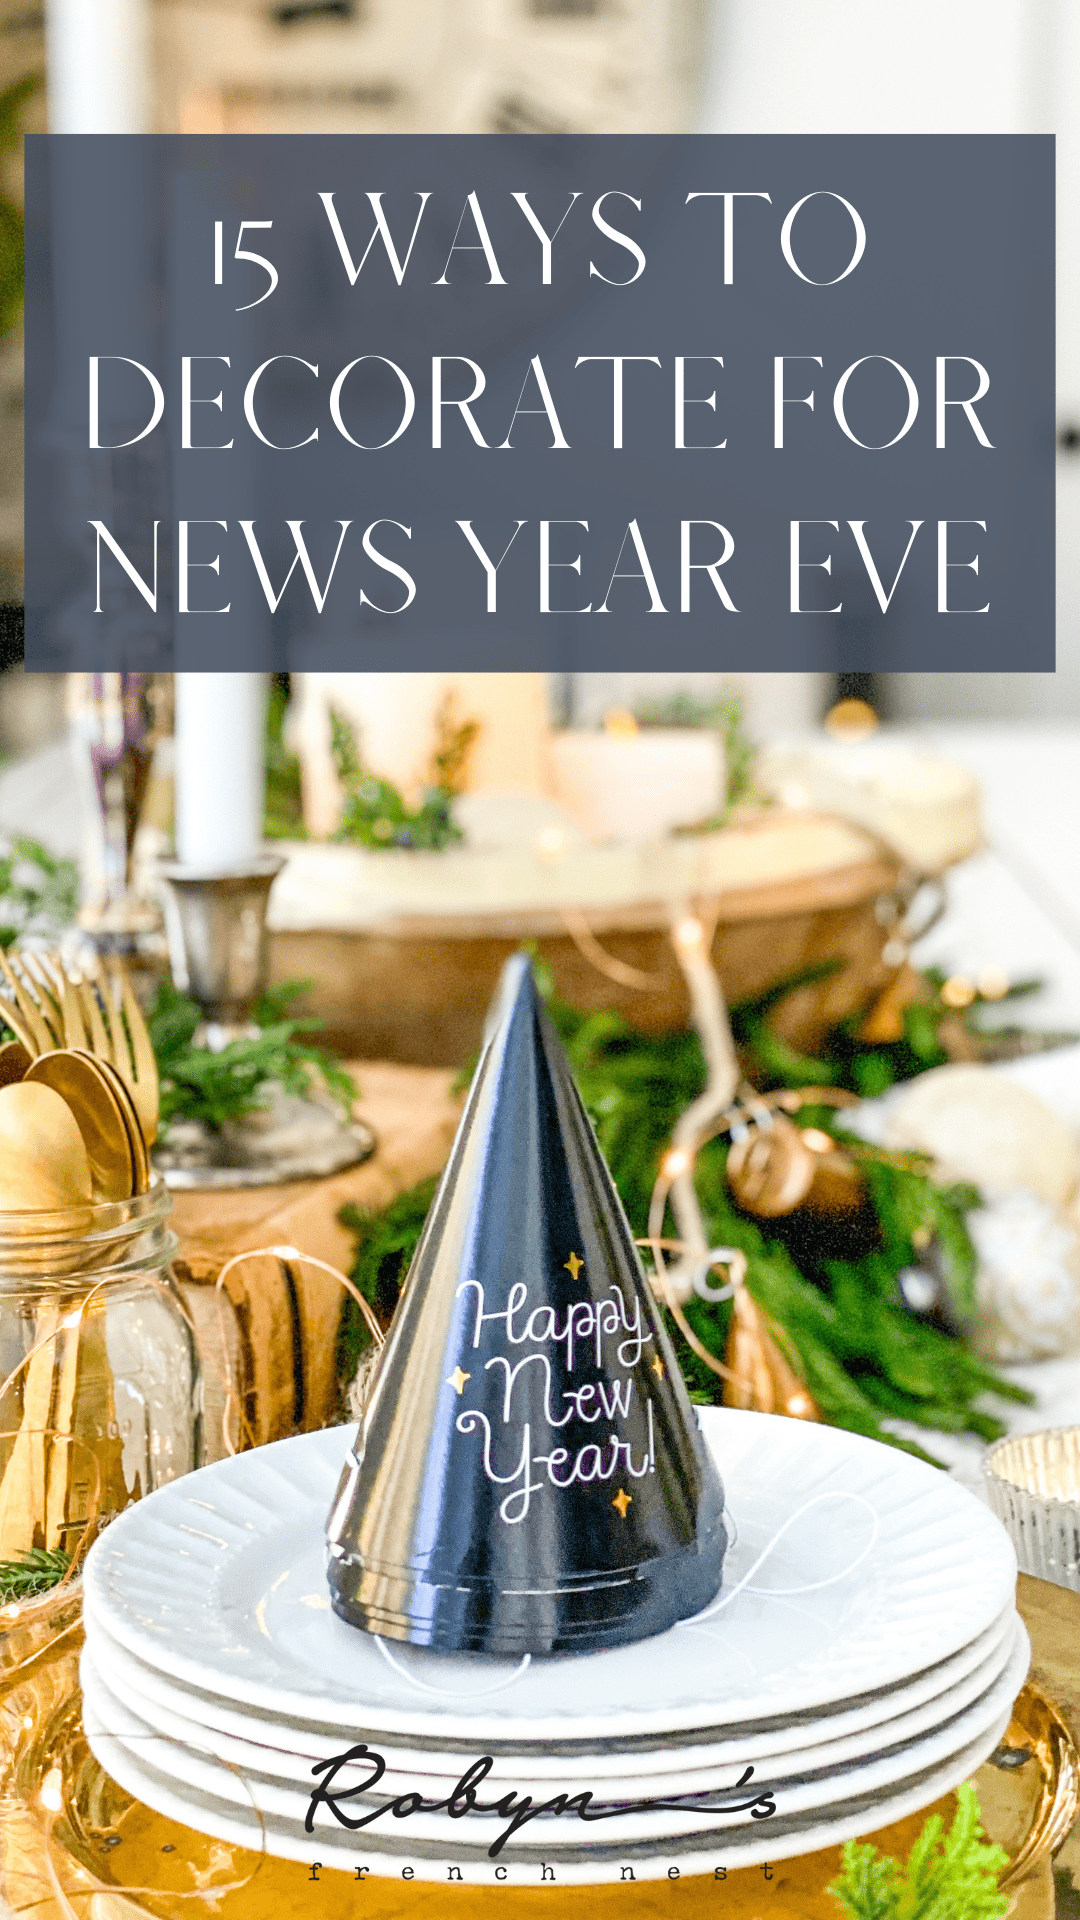 15 Easy New Year’s Eve Decor Ideas for a Classy and Cozy Home